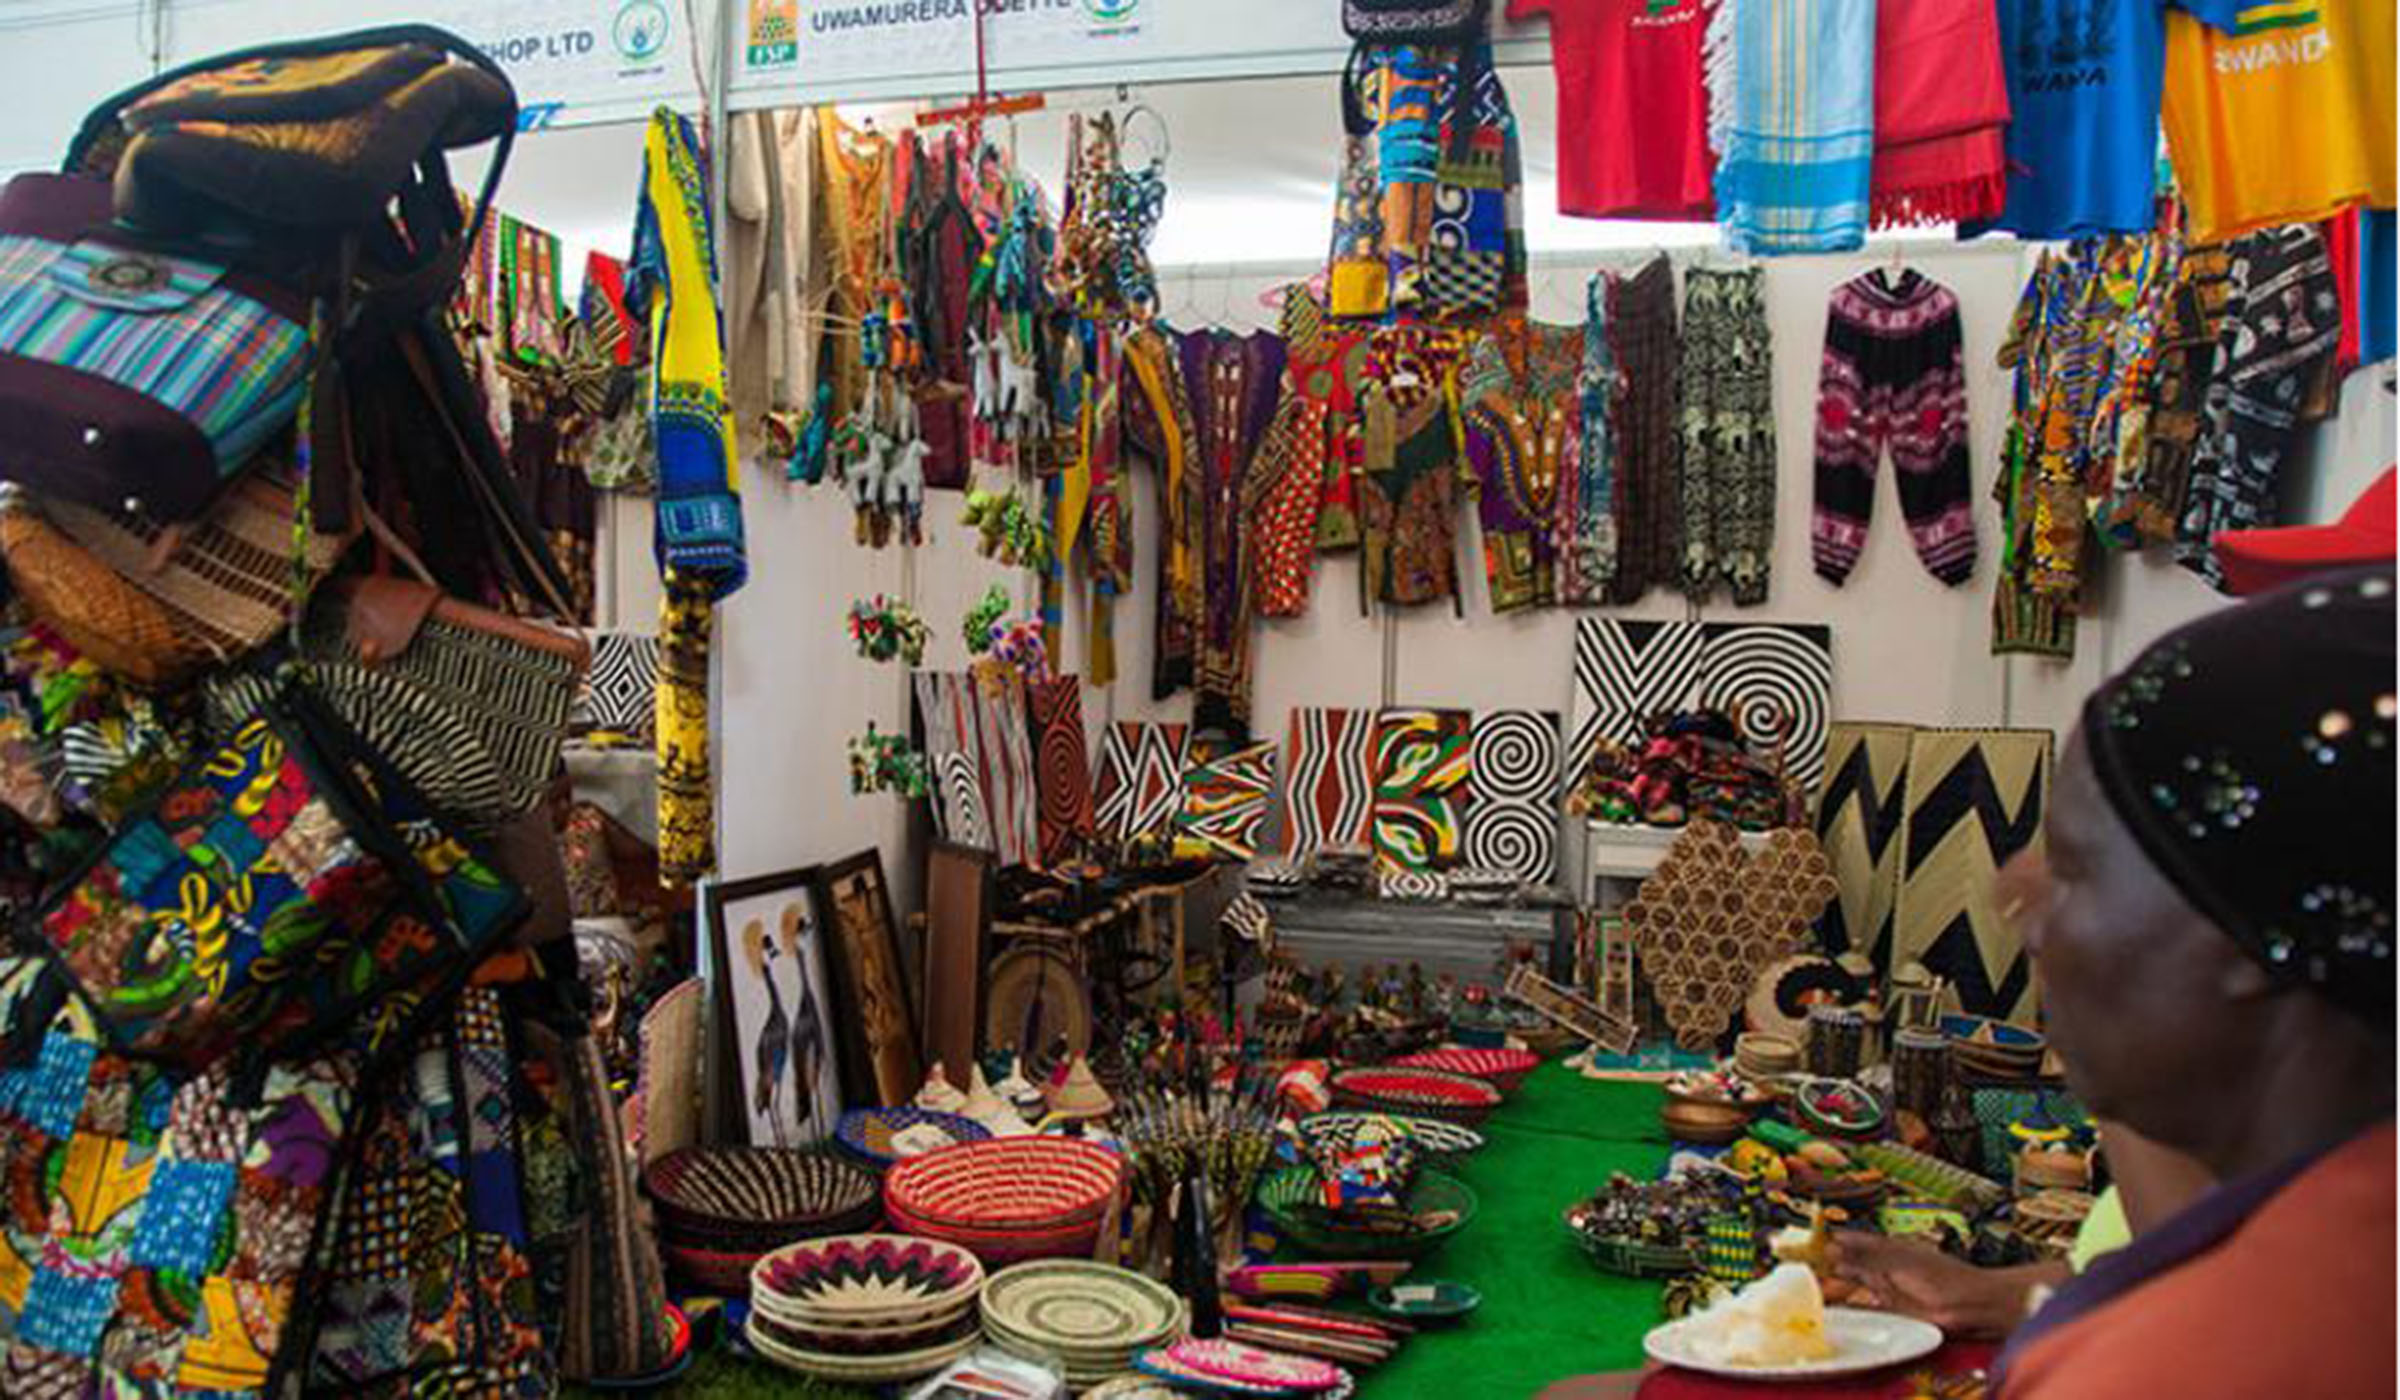 A group of over 60 young entrepreneurs with Small and Medium Enterprises producing Made-in-Rwanda products has gathered their ideas and resources to make use of Kigaliu2019s car-free zone to showcase their products . File.